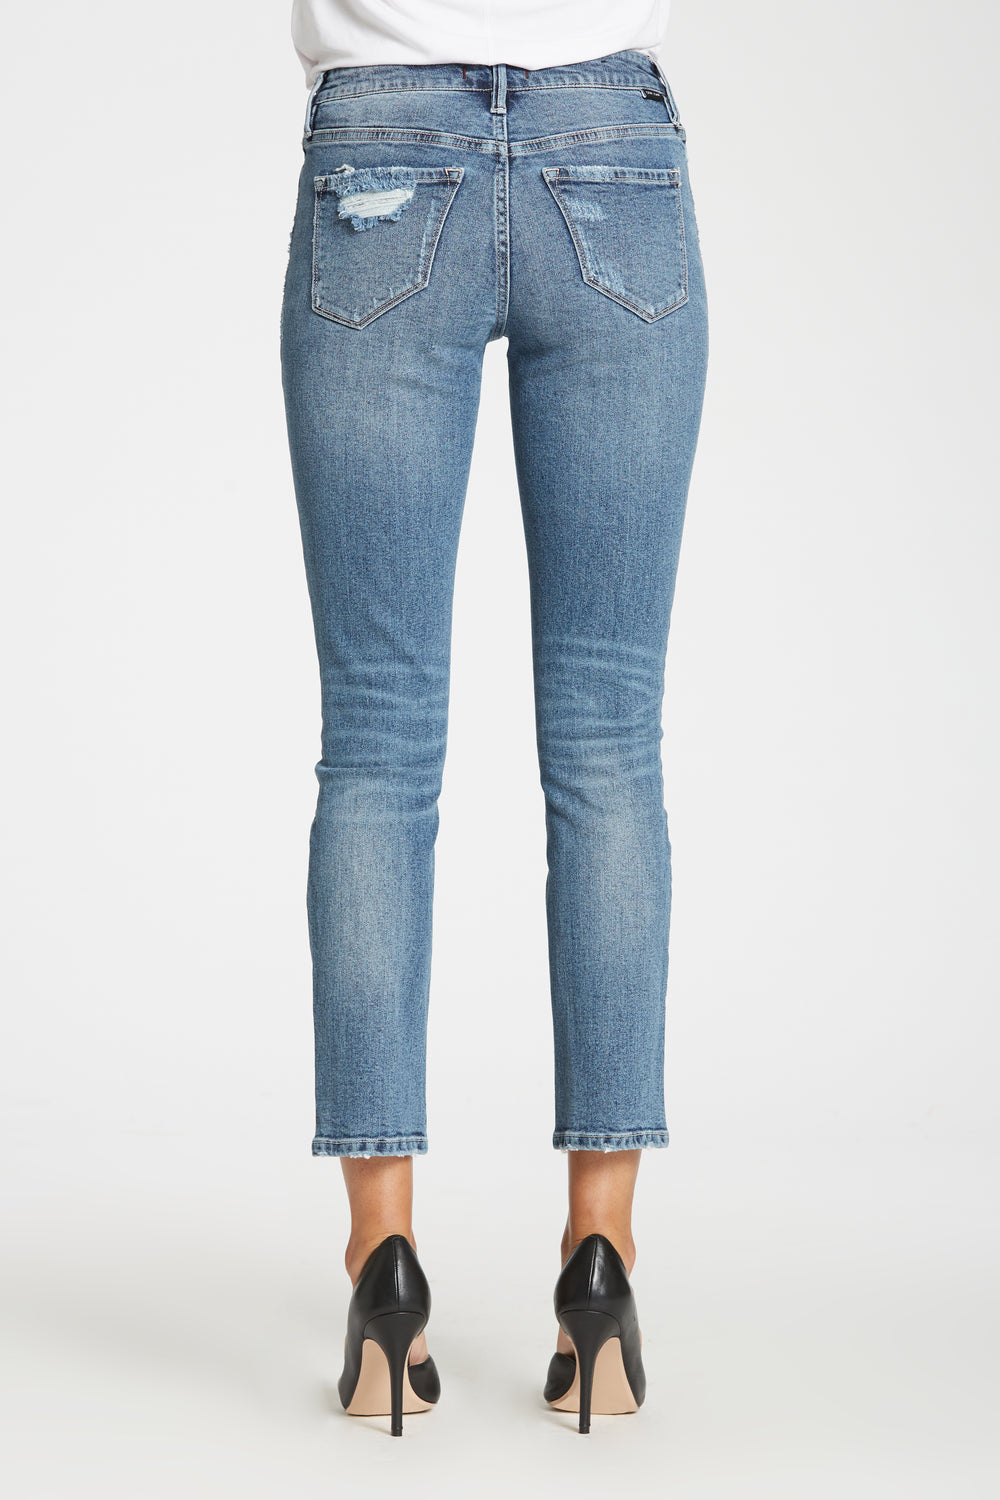 image of a female model wearing a 9 1/2" BLAIRE STRAIGHT LEG JEANS IN REVEE JEANS